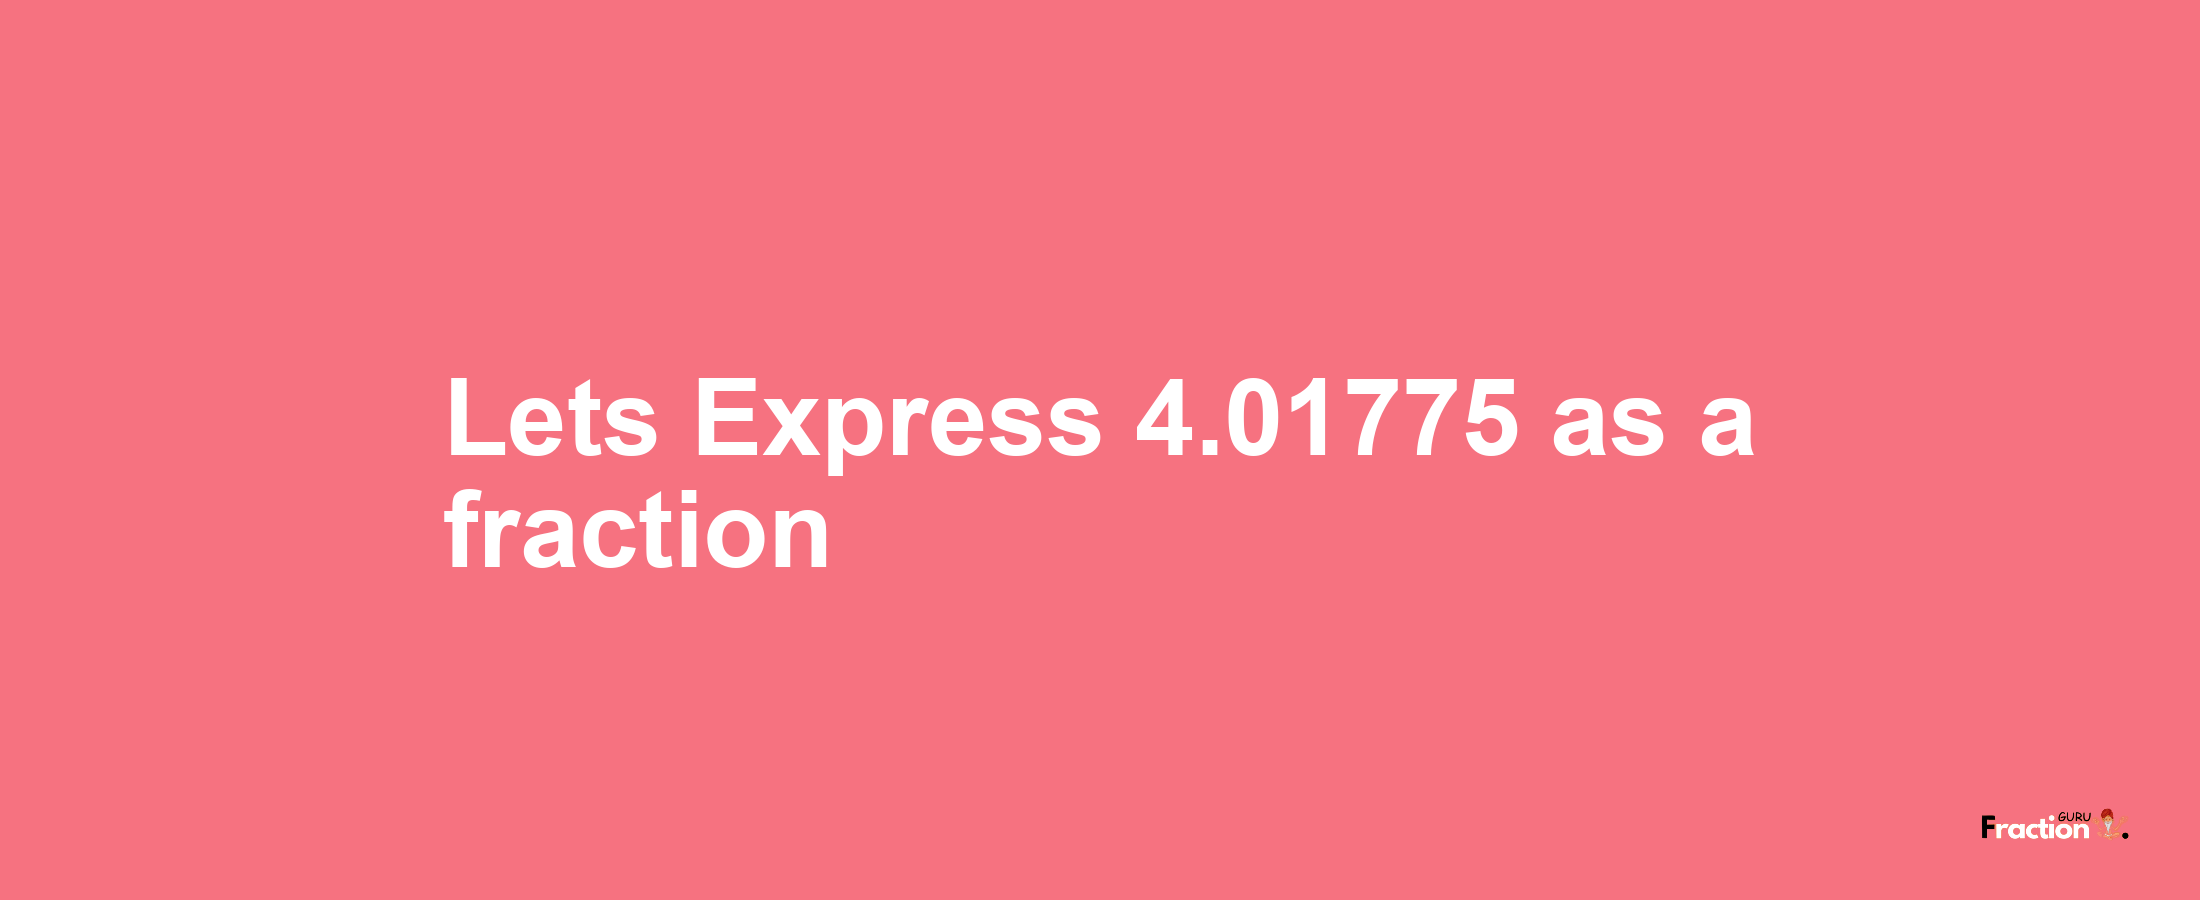 Lets Express 4.01775 as afraction